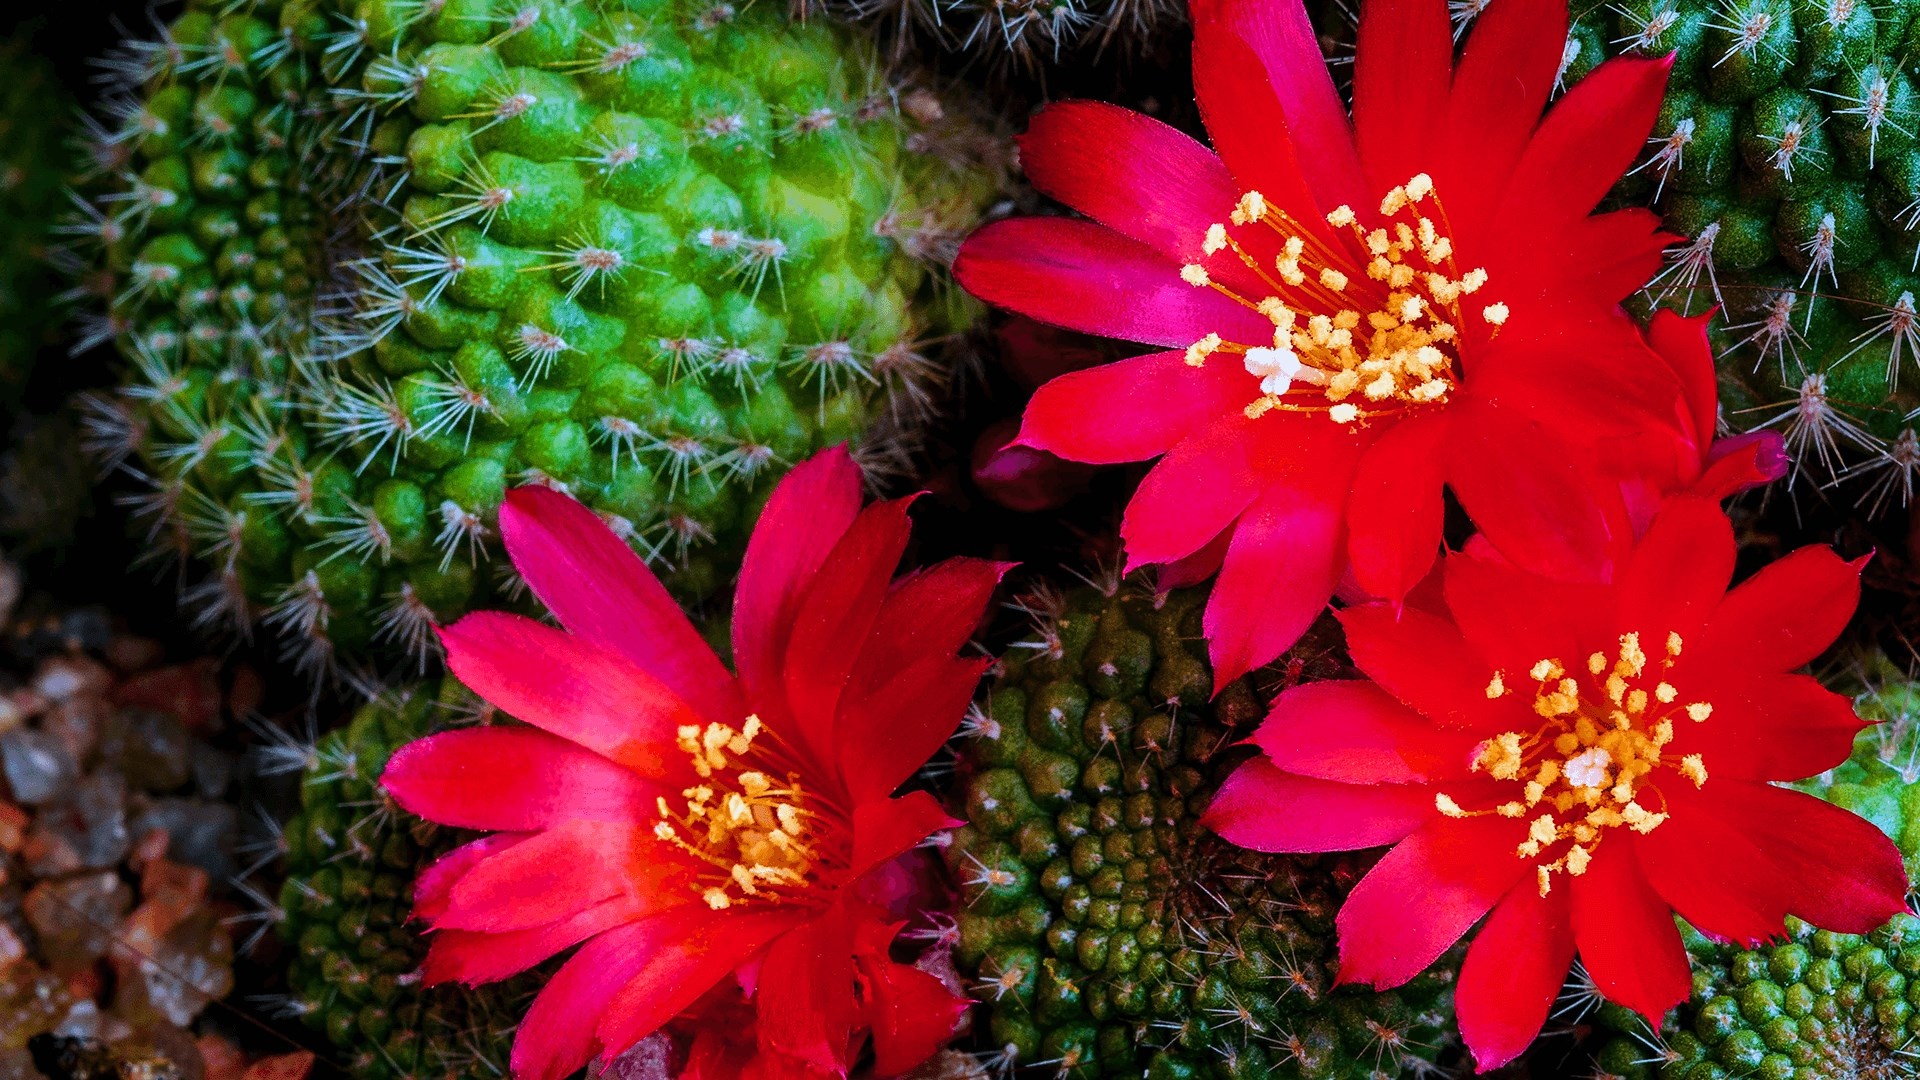 Cactus: In the absence of true leaves, stems carry out photosynthesis. 1920x1080 Full HD Wallpaper.